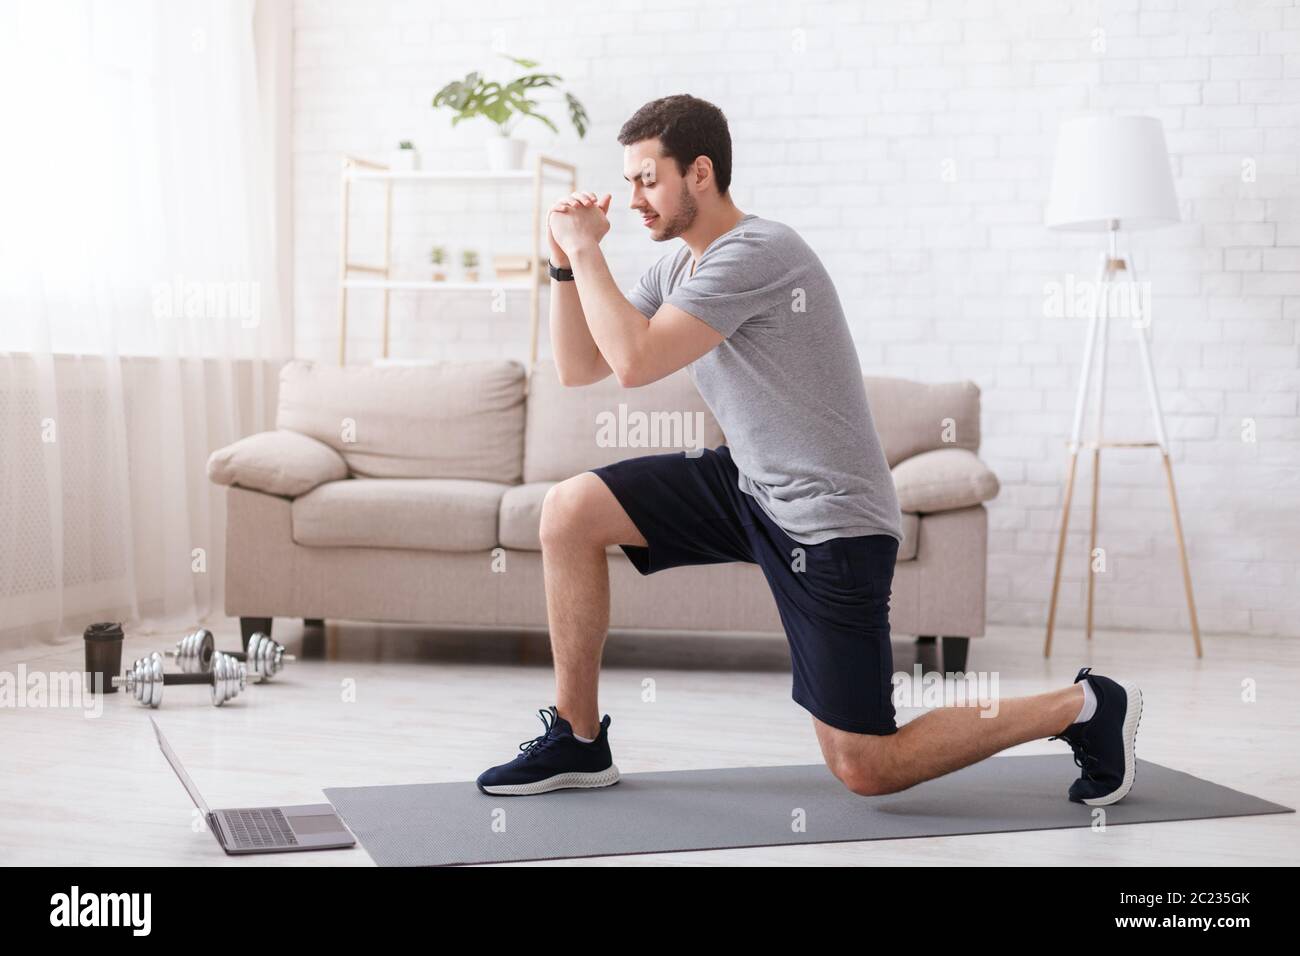 Sport activities at home. Young man watches online exercises and doing lunges Stock Photo